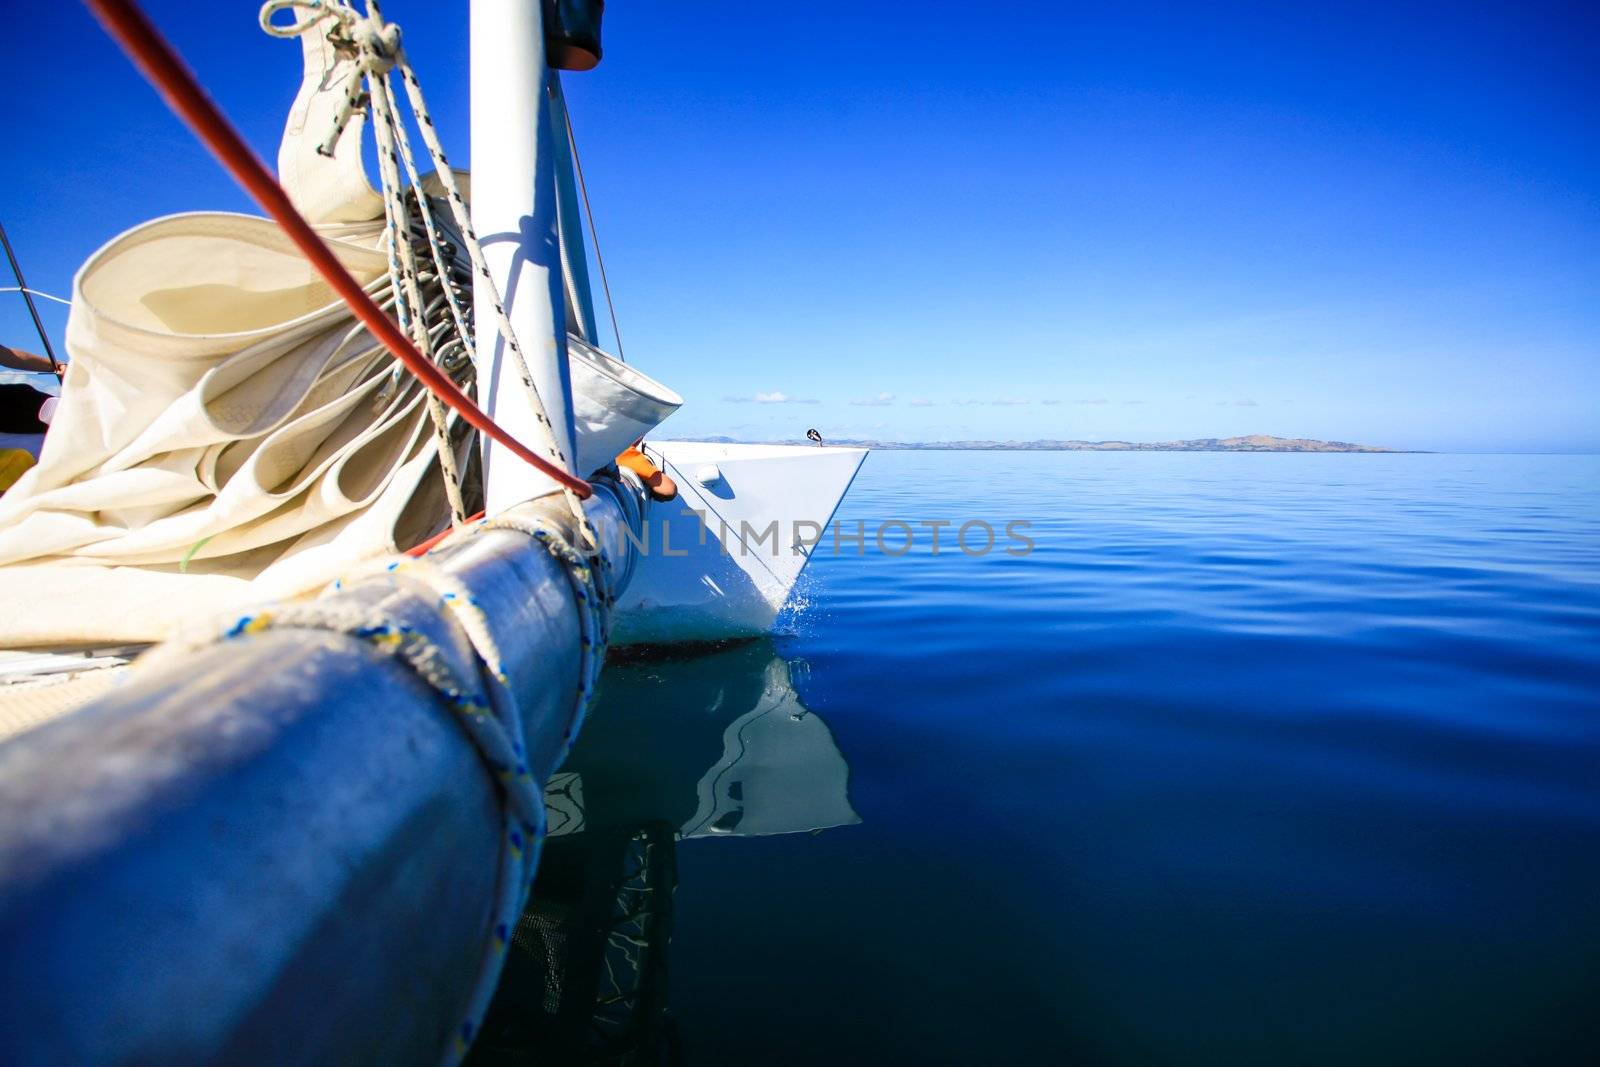 View of the bow of a sailing boat in calm blue sea with red rope riggings and white mast.